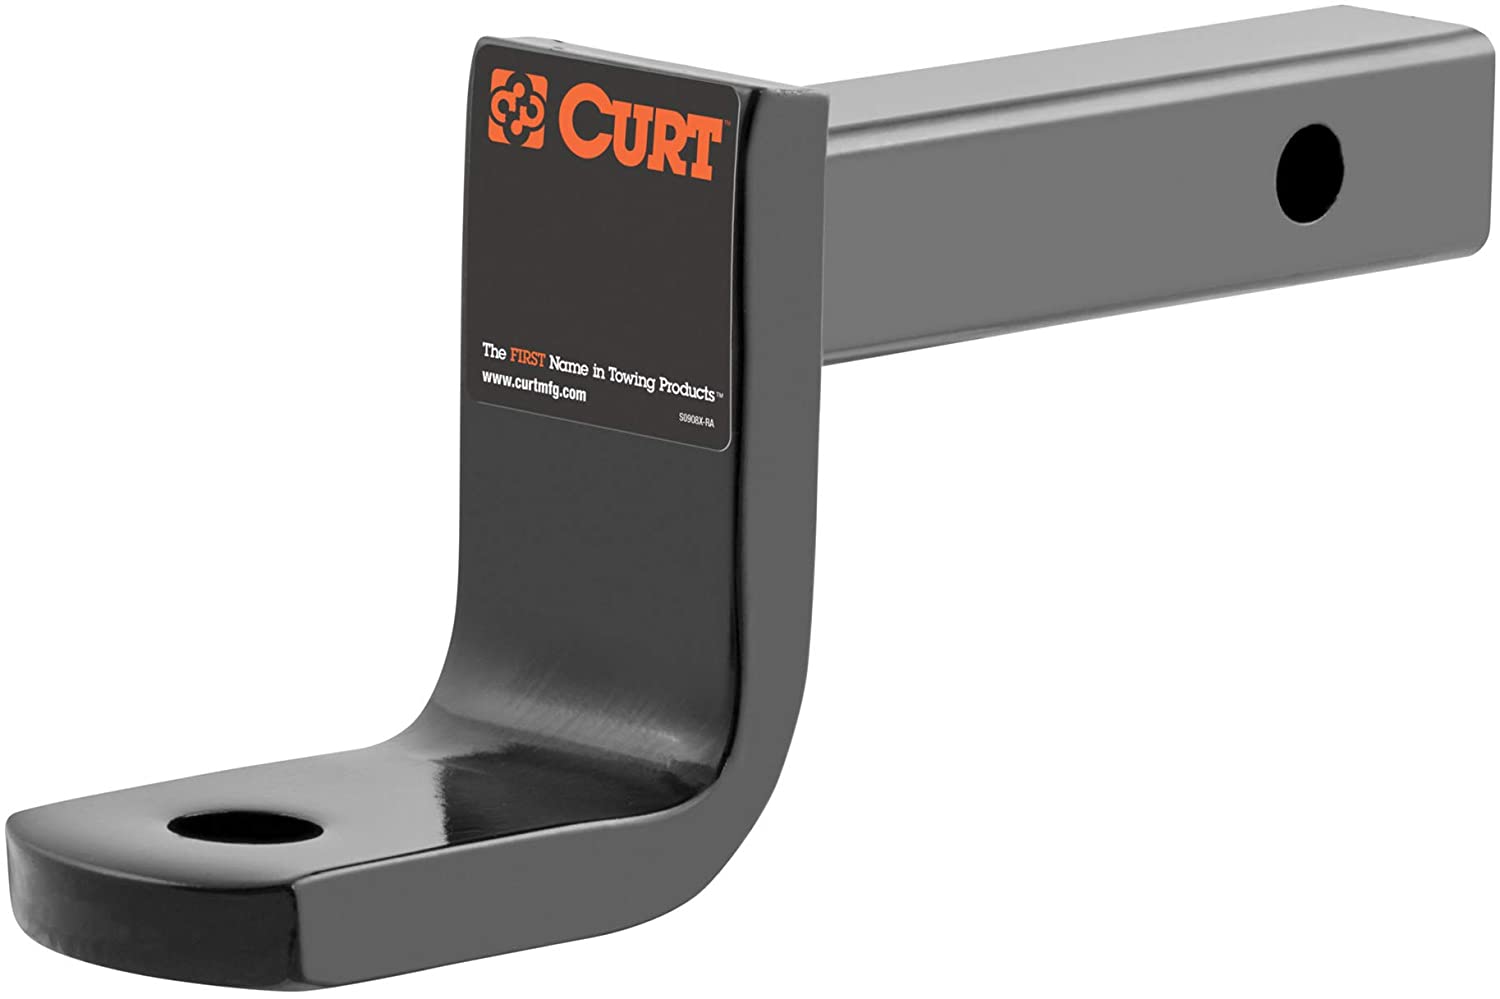 CURT 45521 Class 2 Trailer Hitch Ball Mount, Fits 1-1/4-Inch Receiver, 3,500 lbs, 3/4-Inch Hole, 3-1/4-Inch Drop, 2-5/8-Inch Rise